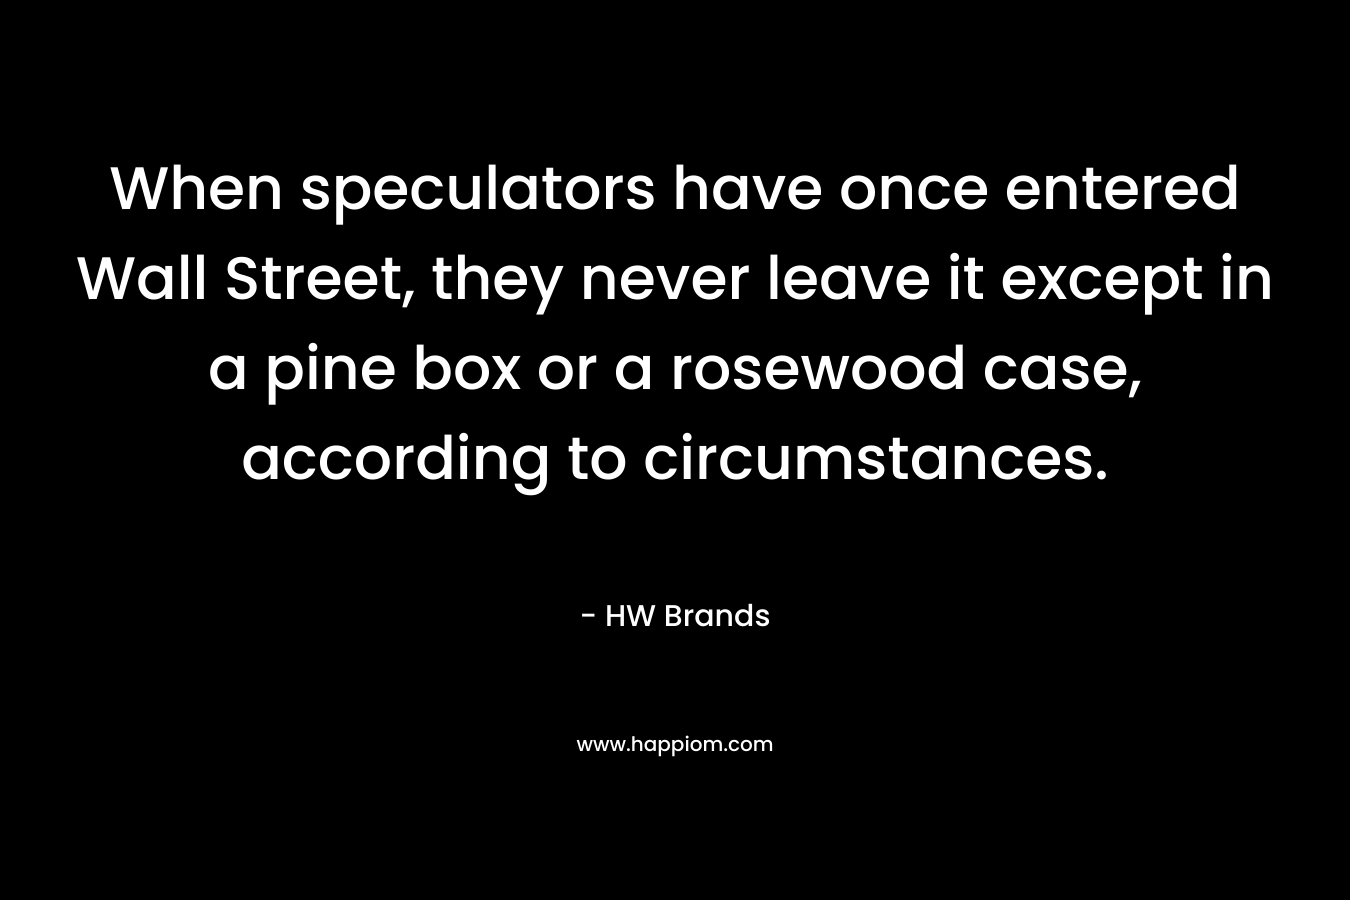 When speculators have once entered Wall Street, they never leave it except in a pine box or a rosewood case, according to circumstances. – HW Brands